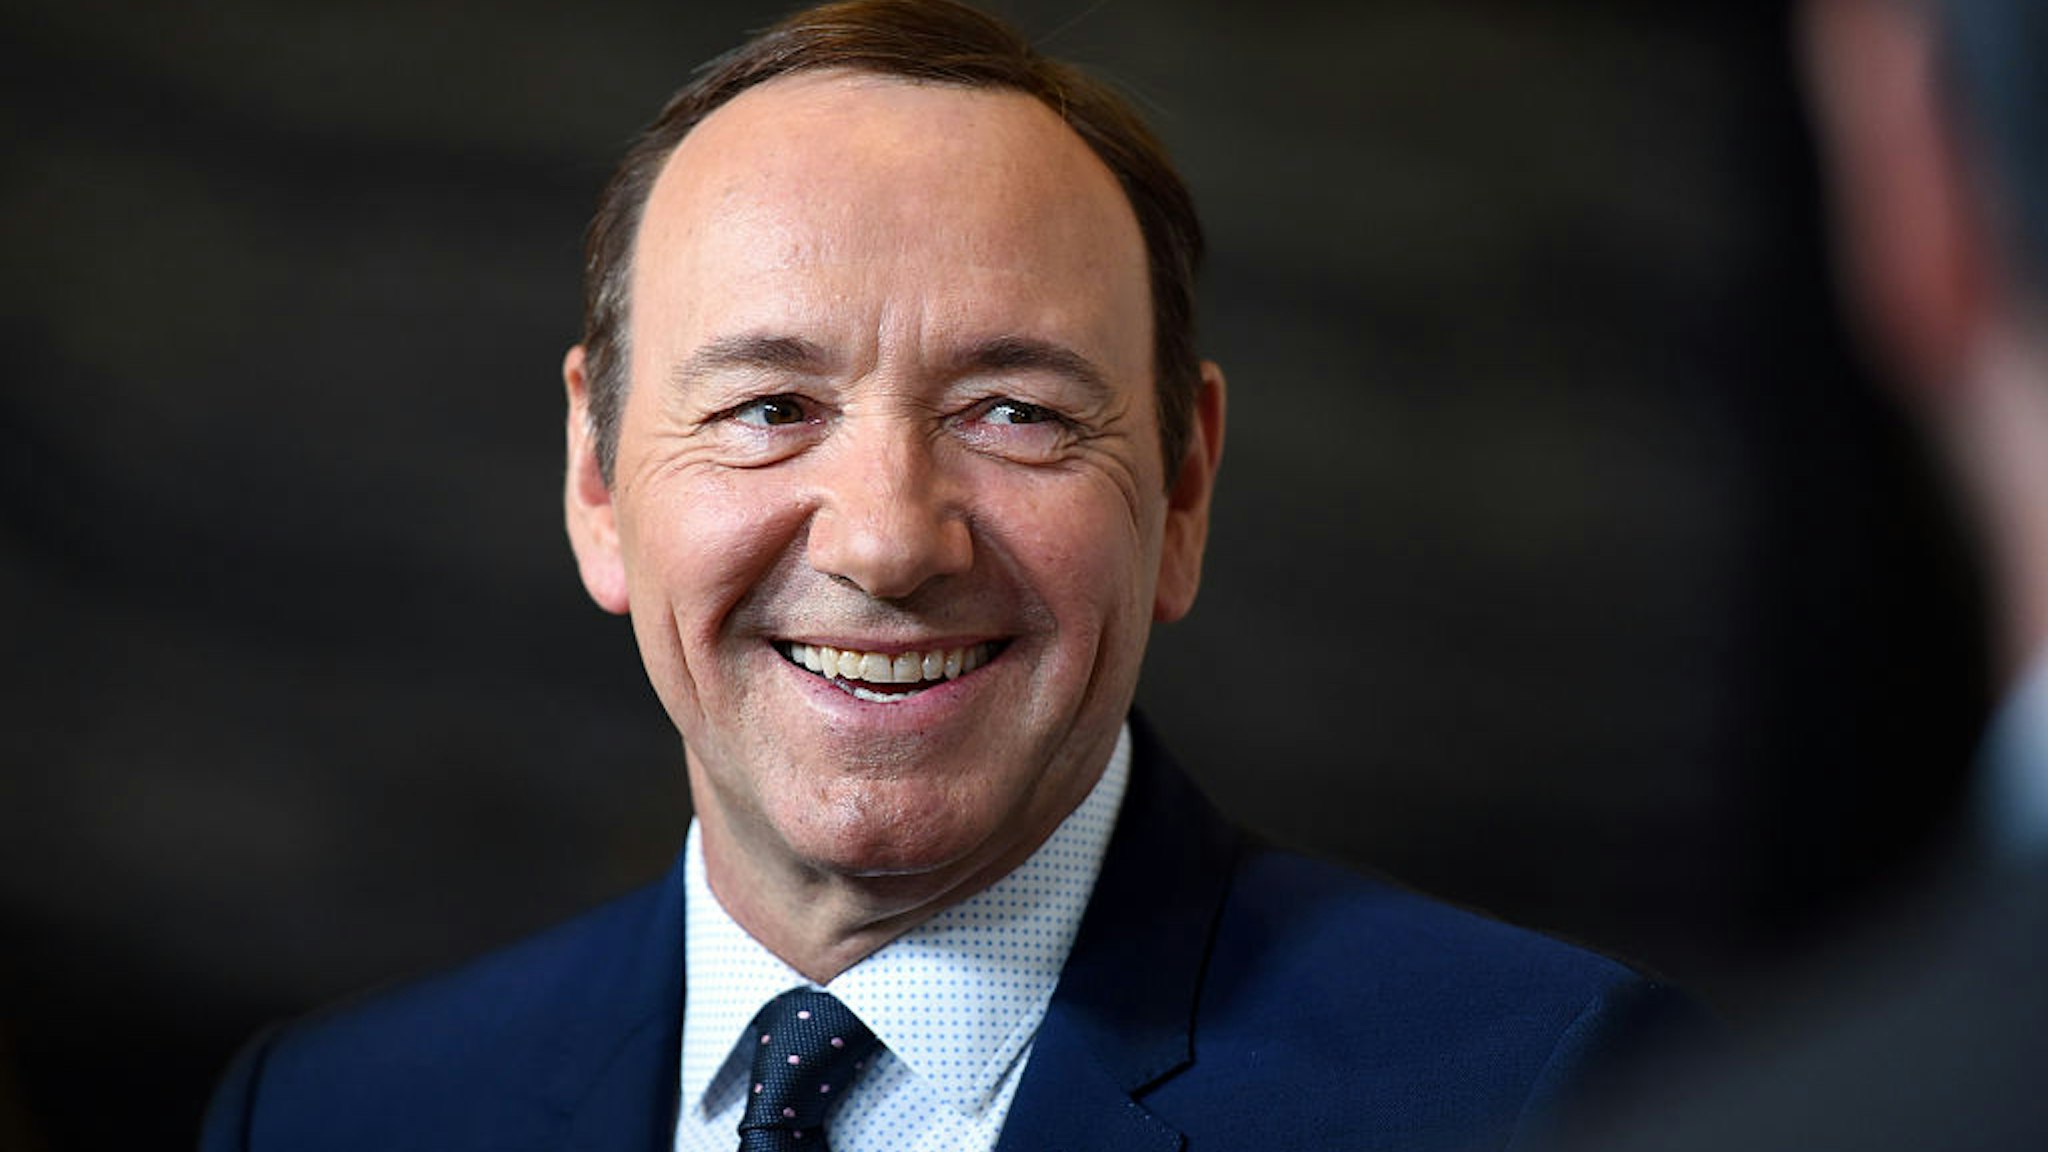 HOLLYWOOD, CA - APRIL 25: Actor Kevin Spacey arrives at the 4th Annual Reel Stories, Real Lives event benefiting the Motion Picture &amp; Television Fund at Milk Studios on April 25, 2015 in Hollywood, California. (Photo by Amanda Edwards/WireImage)